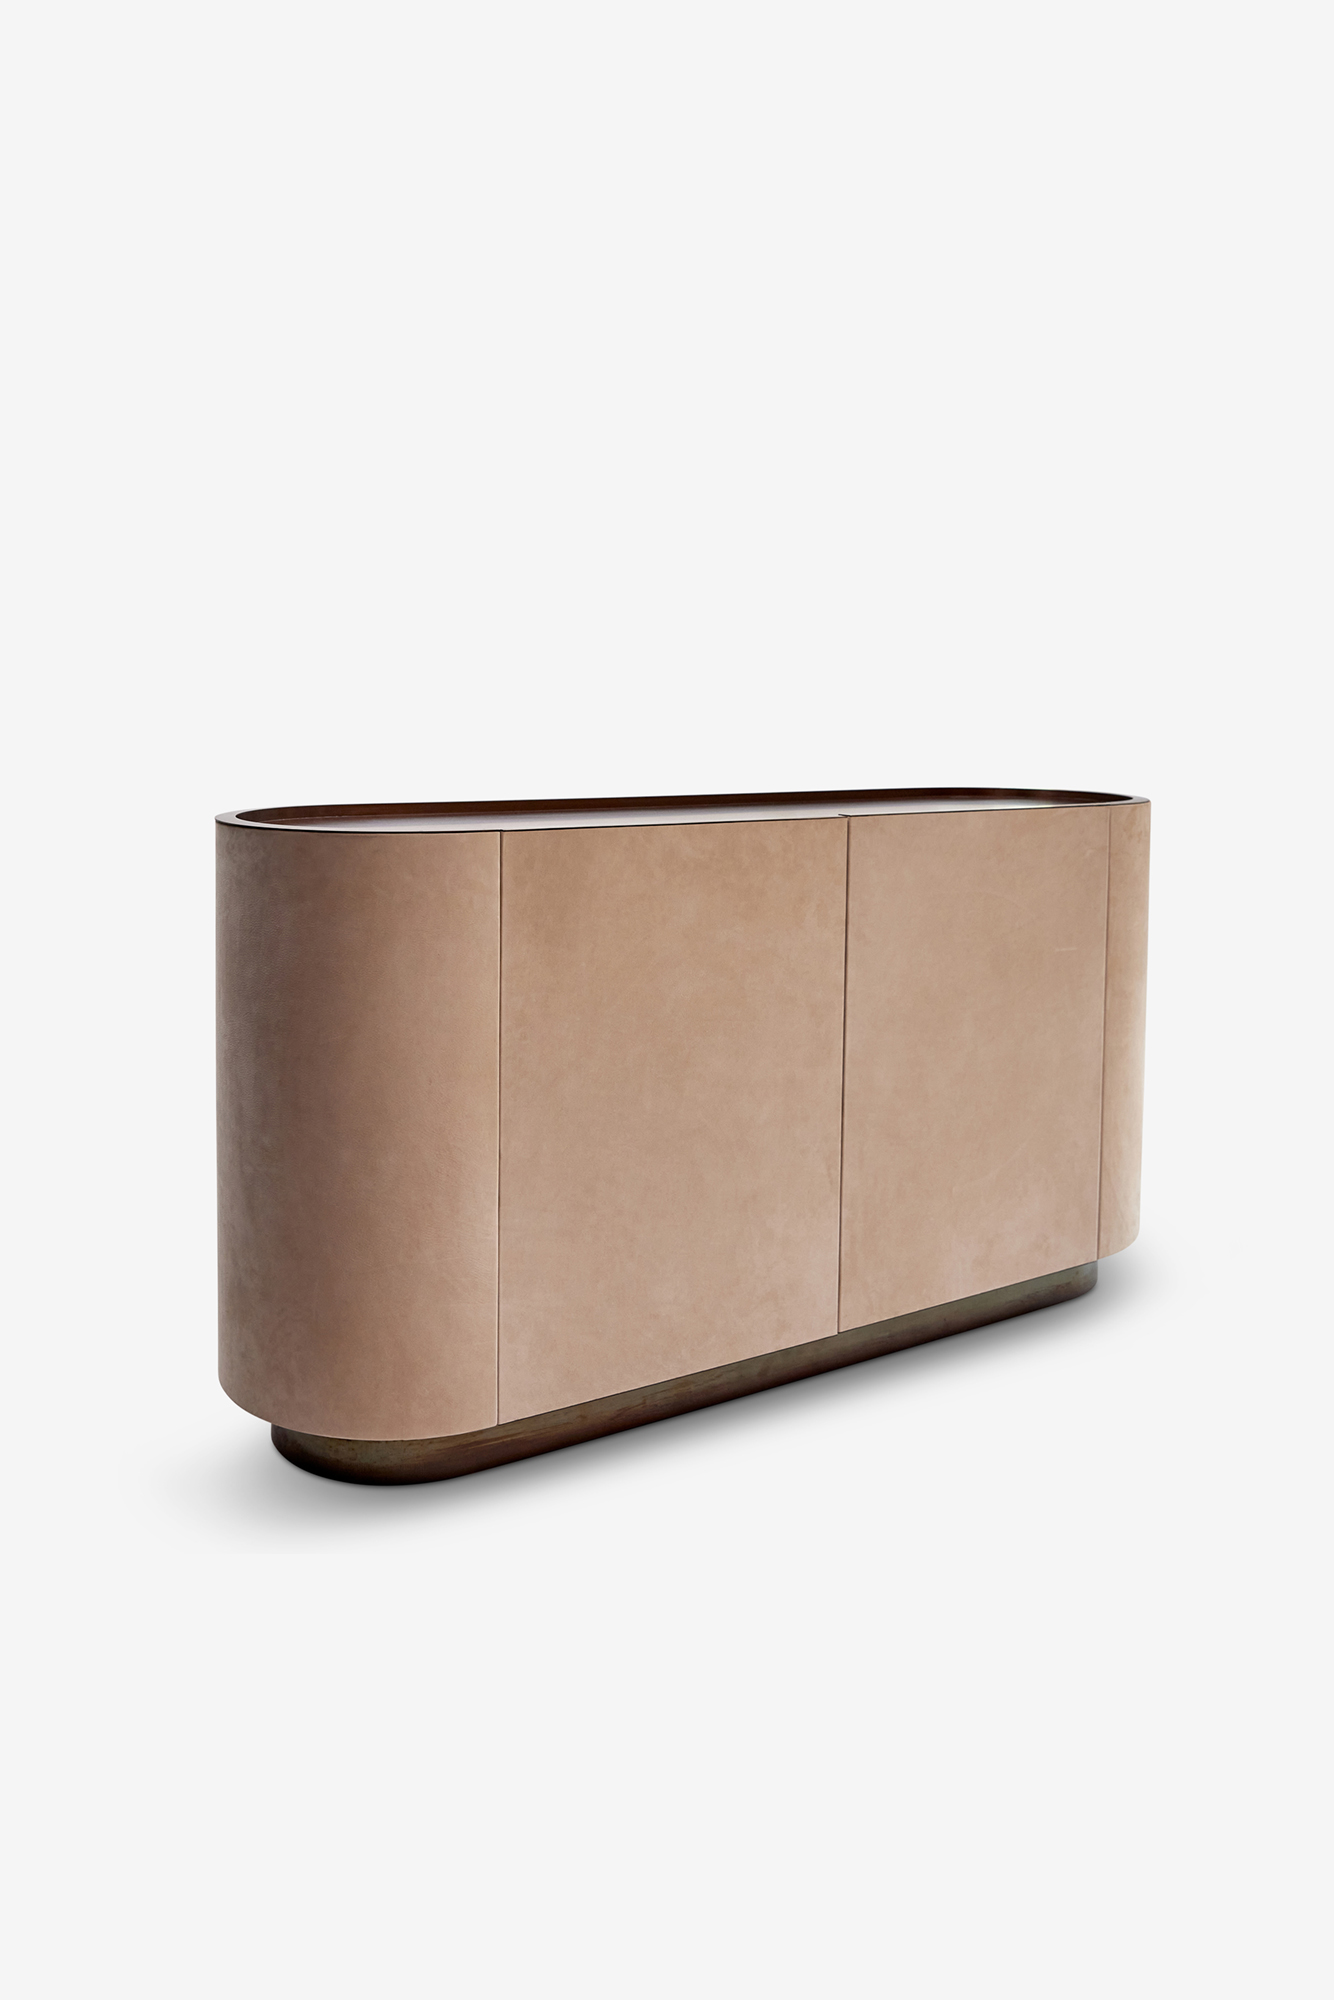 MG305 credenza in leather oak and brass